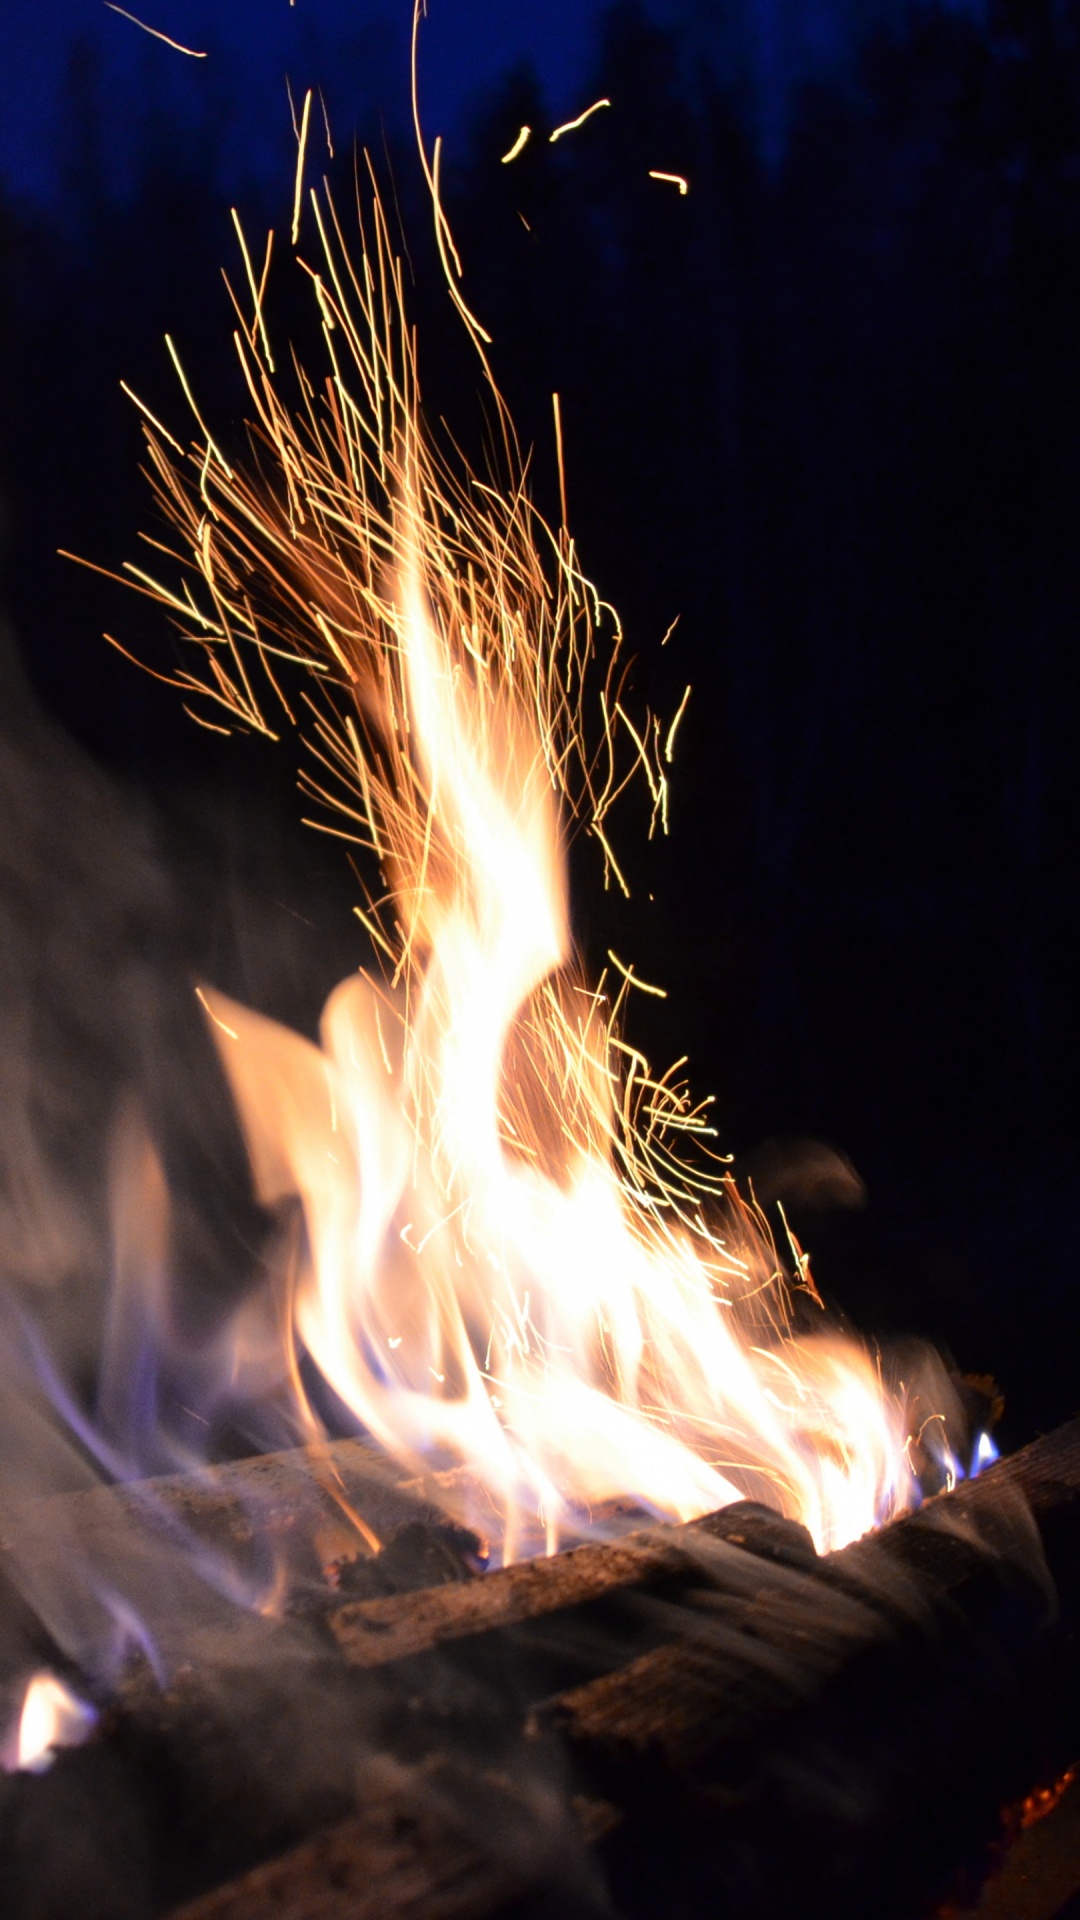 Time Lapse Photography of Fire. Wallpaper in 1080x1920 Resolution